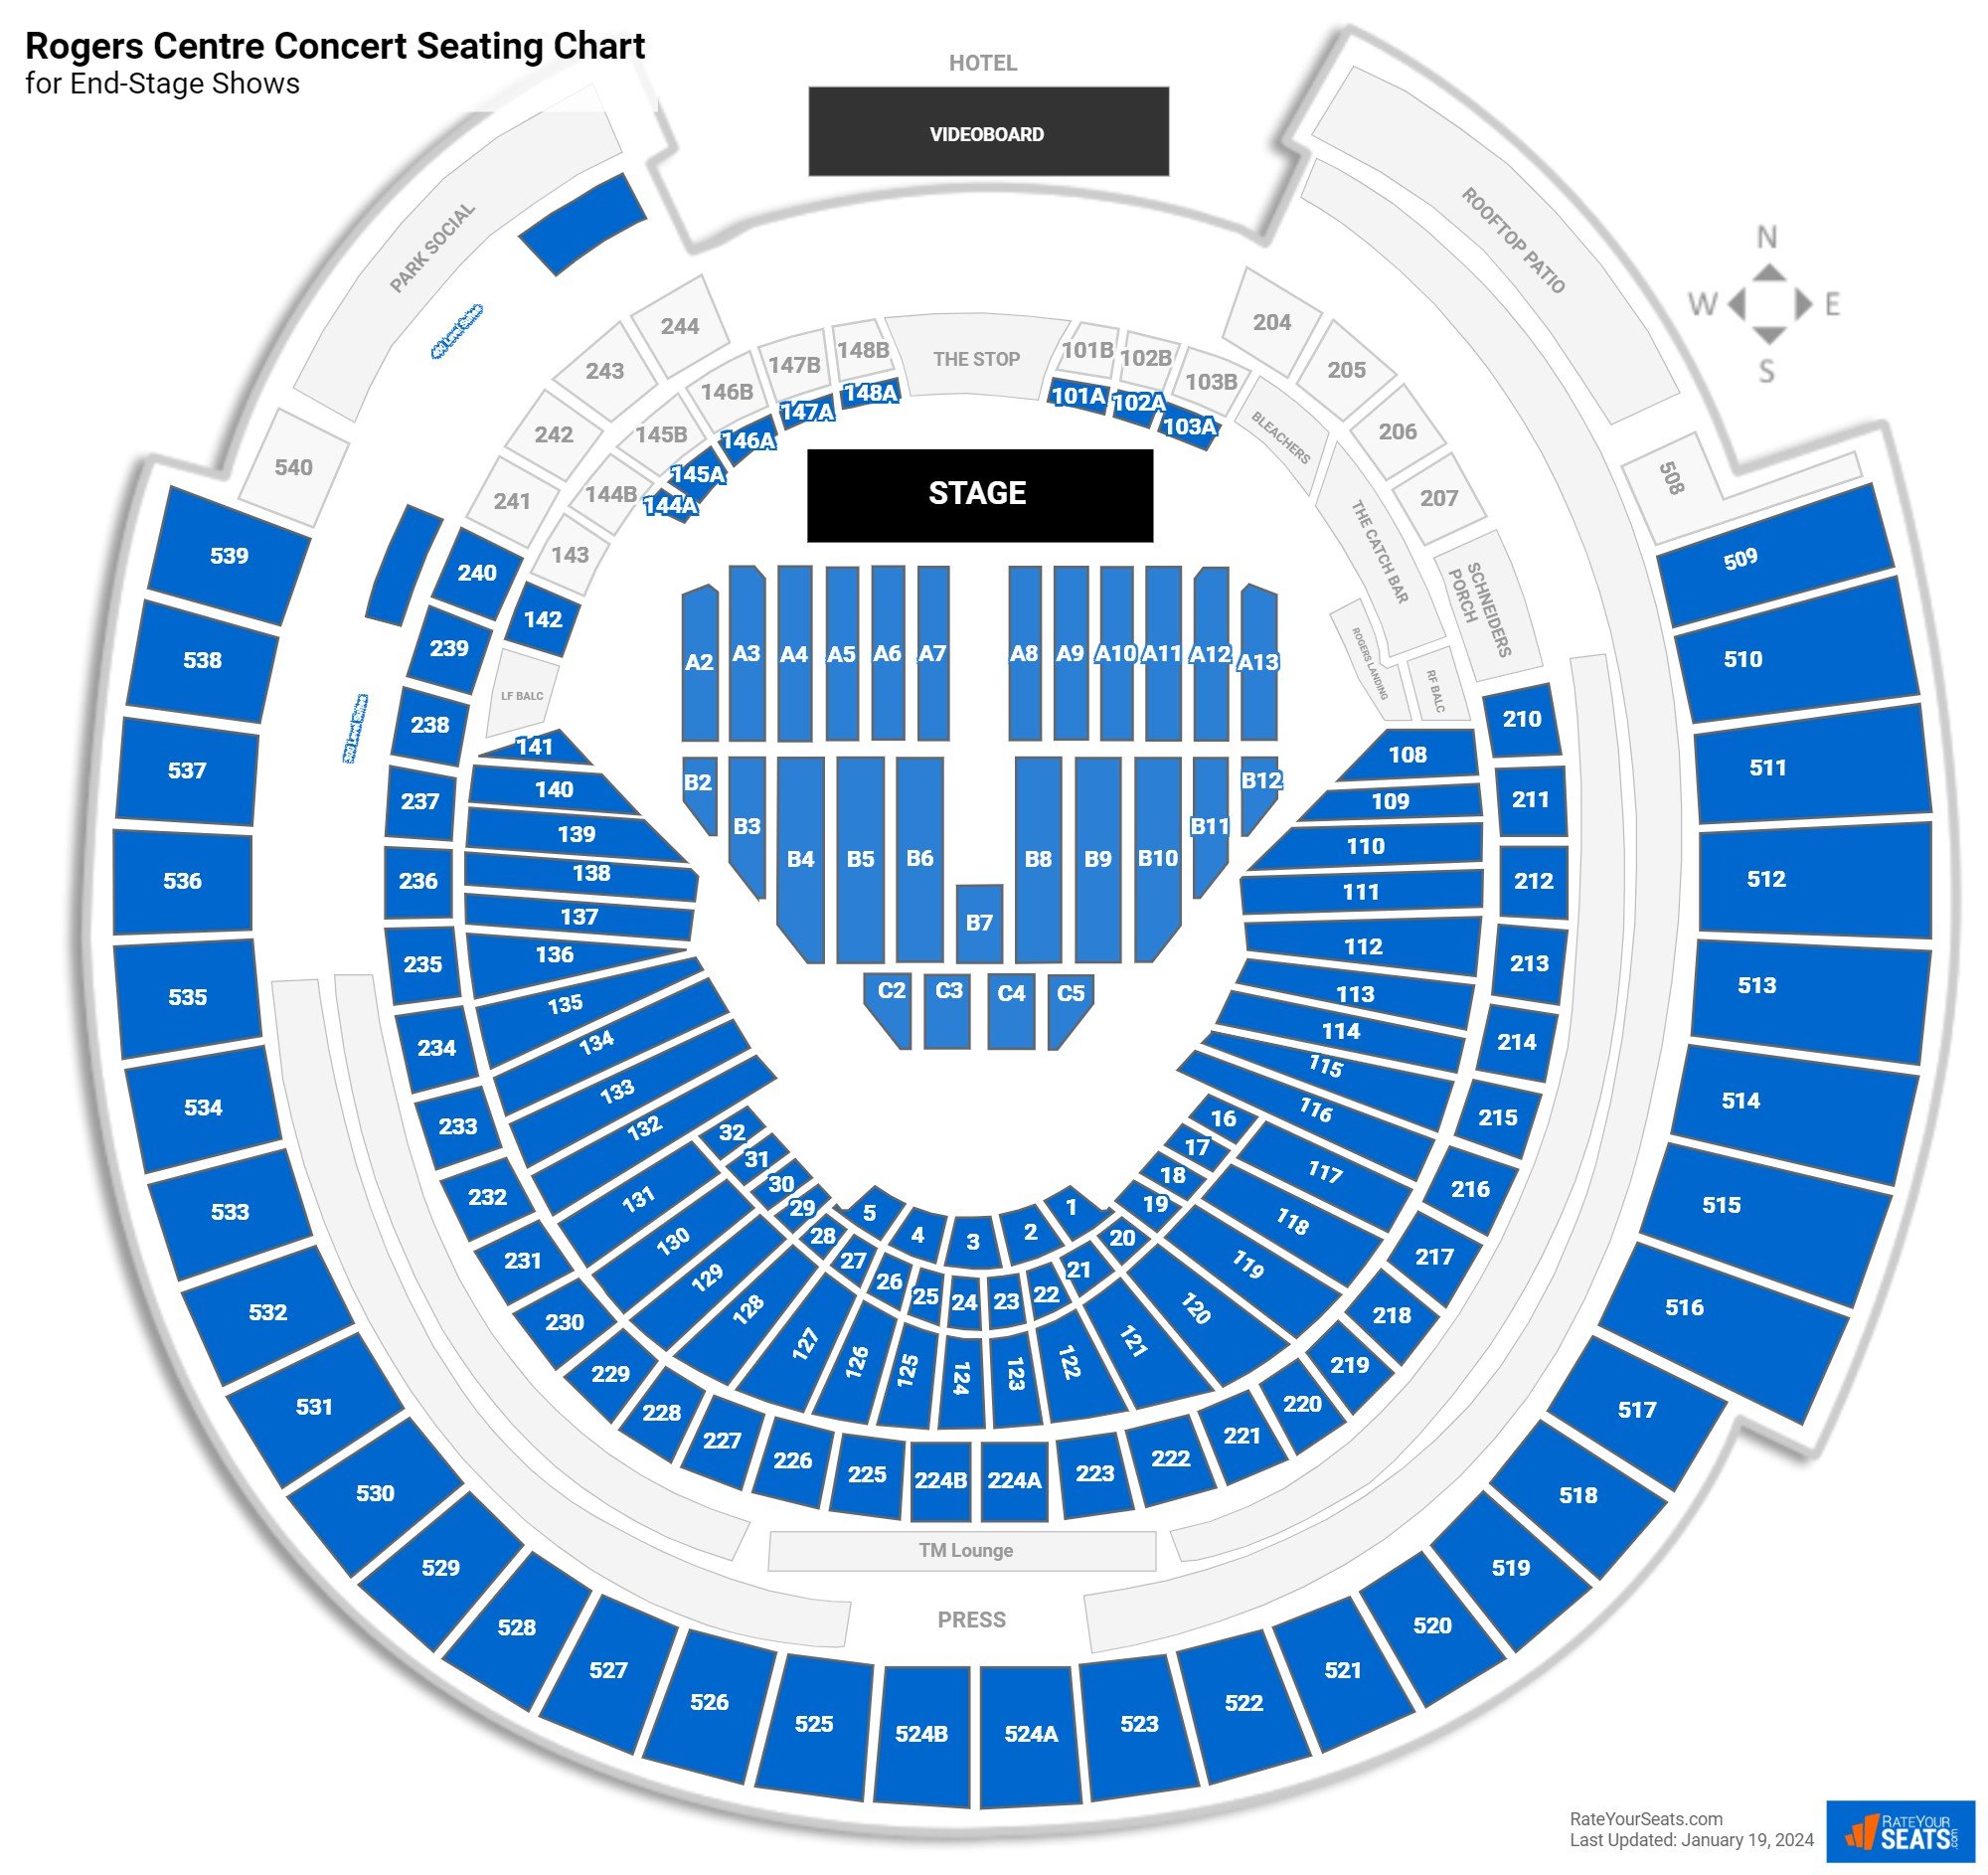 Rogers Centre, Toronto ON - Seating Chart View